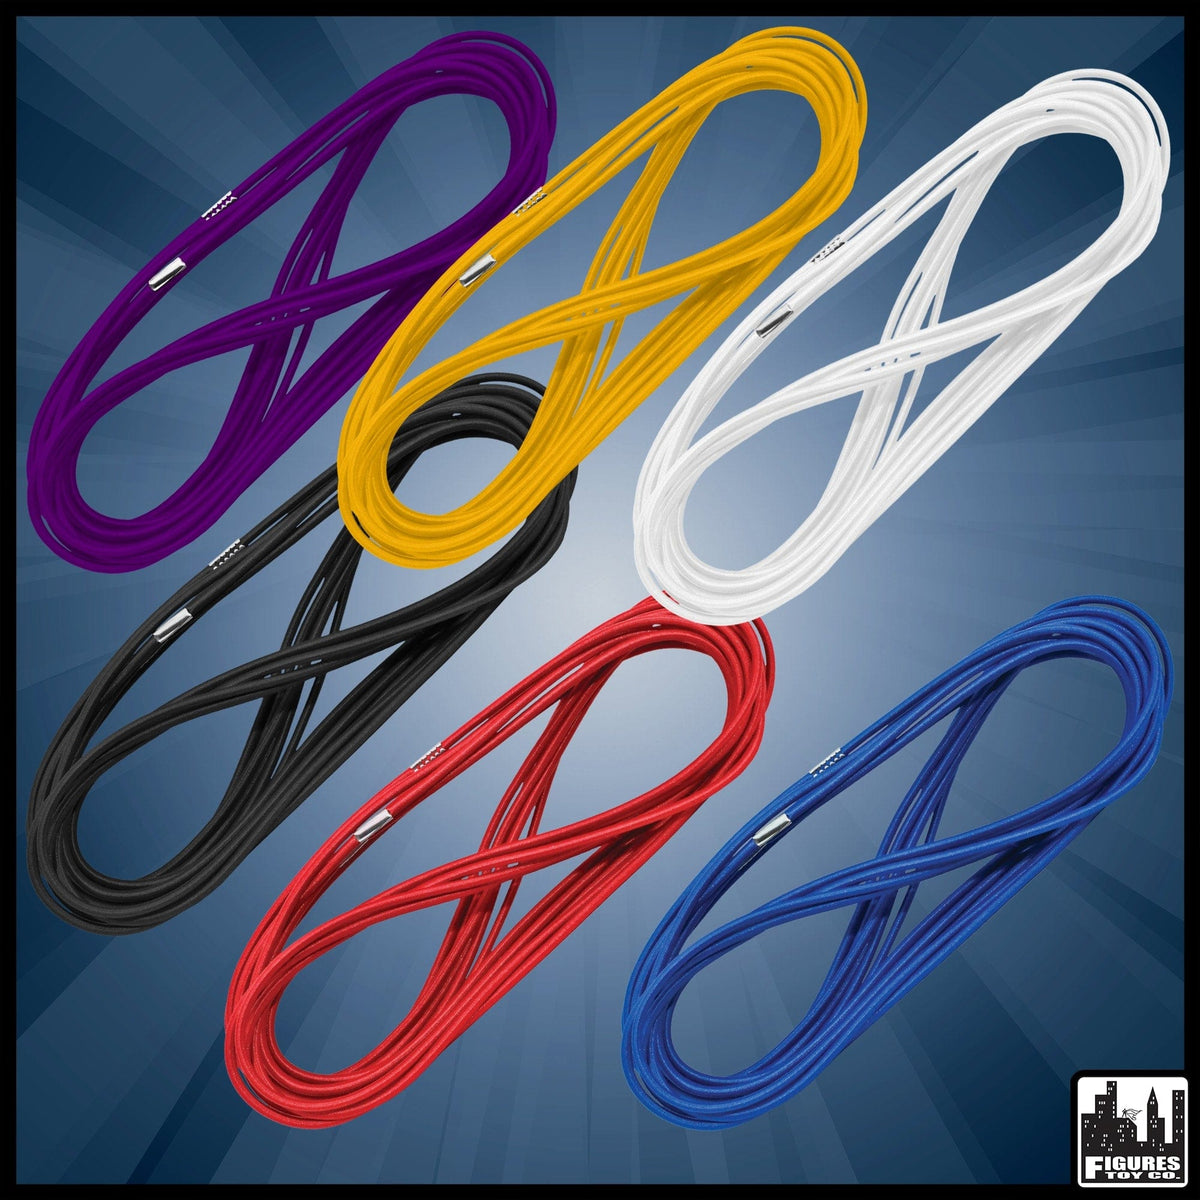 Create Your Own 3 Piece Ring Rope Set for SMALL Wrestling Action Figure Rings by Figures Toy Company